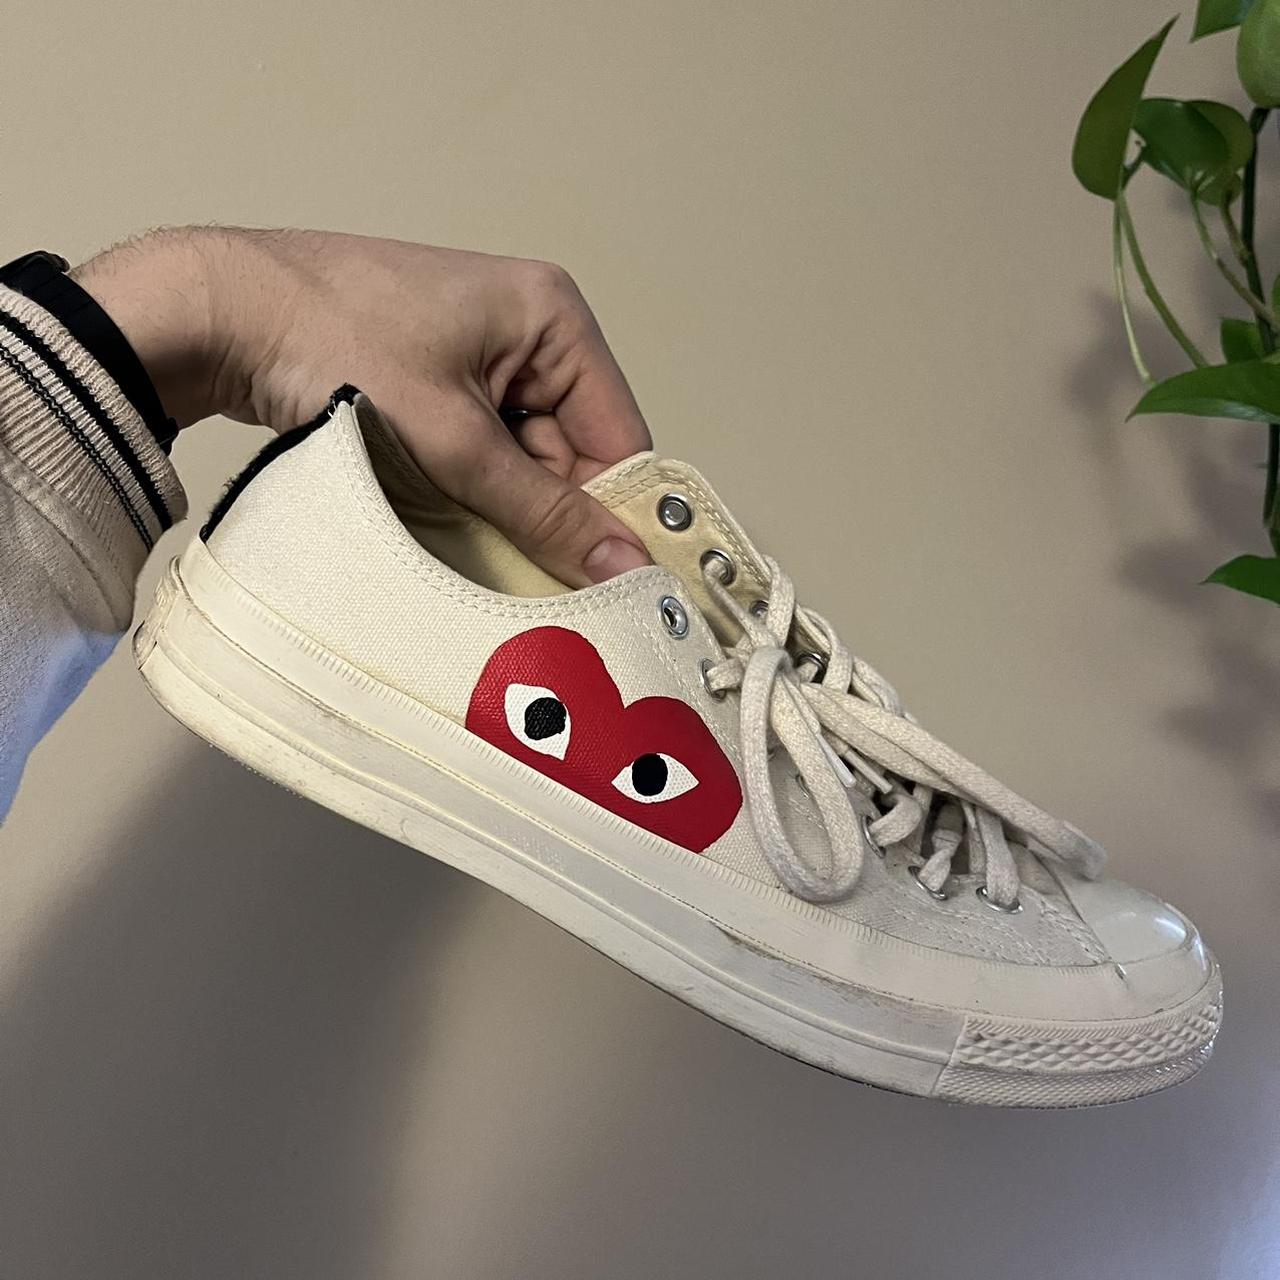 Comme des Garçons Play Men's Red and Cream Trainers